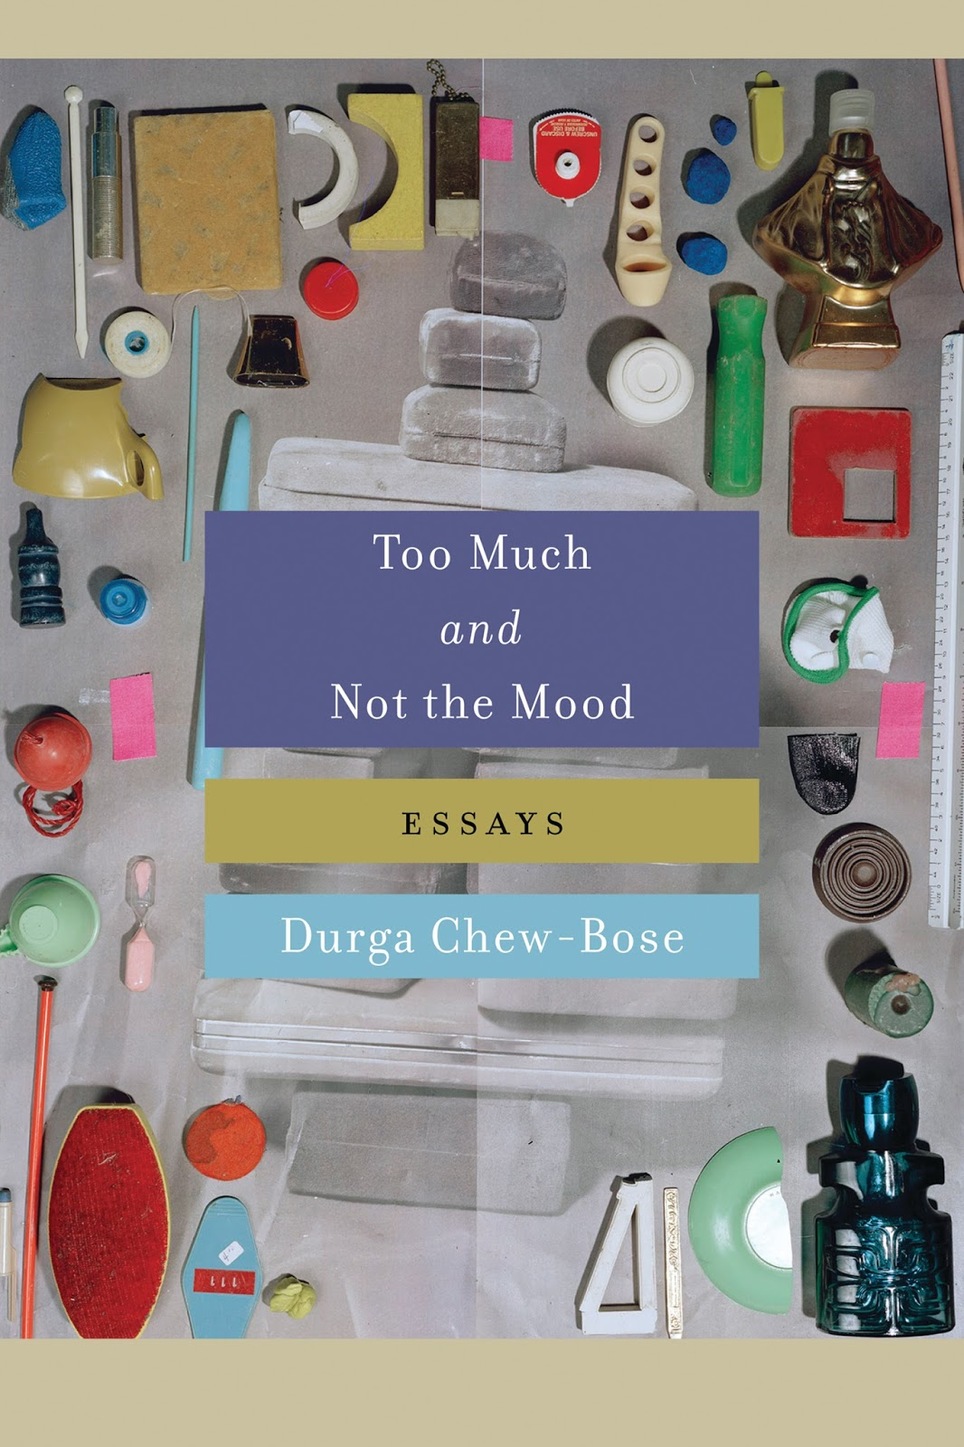 Today, June 15th, 2017 : Durga Chew-Bose talks to Haley Mlotek about TOO MUCH AND NOT THE MOOD